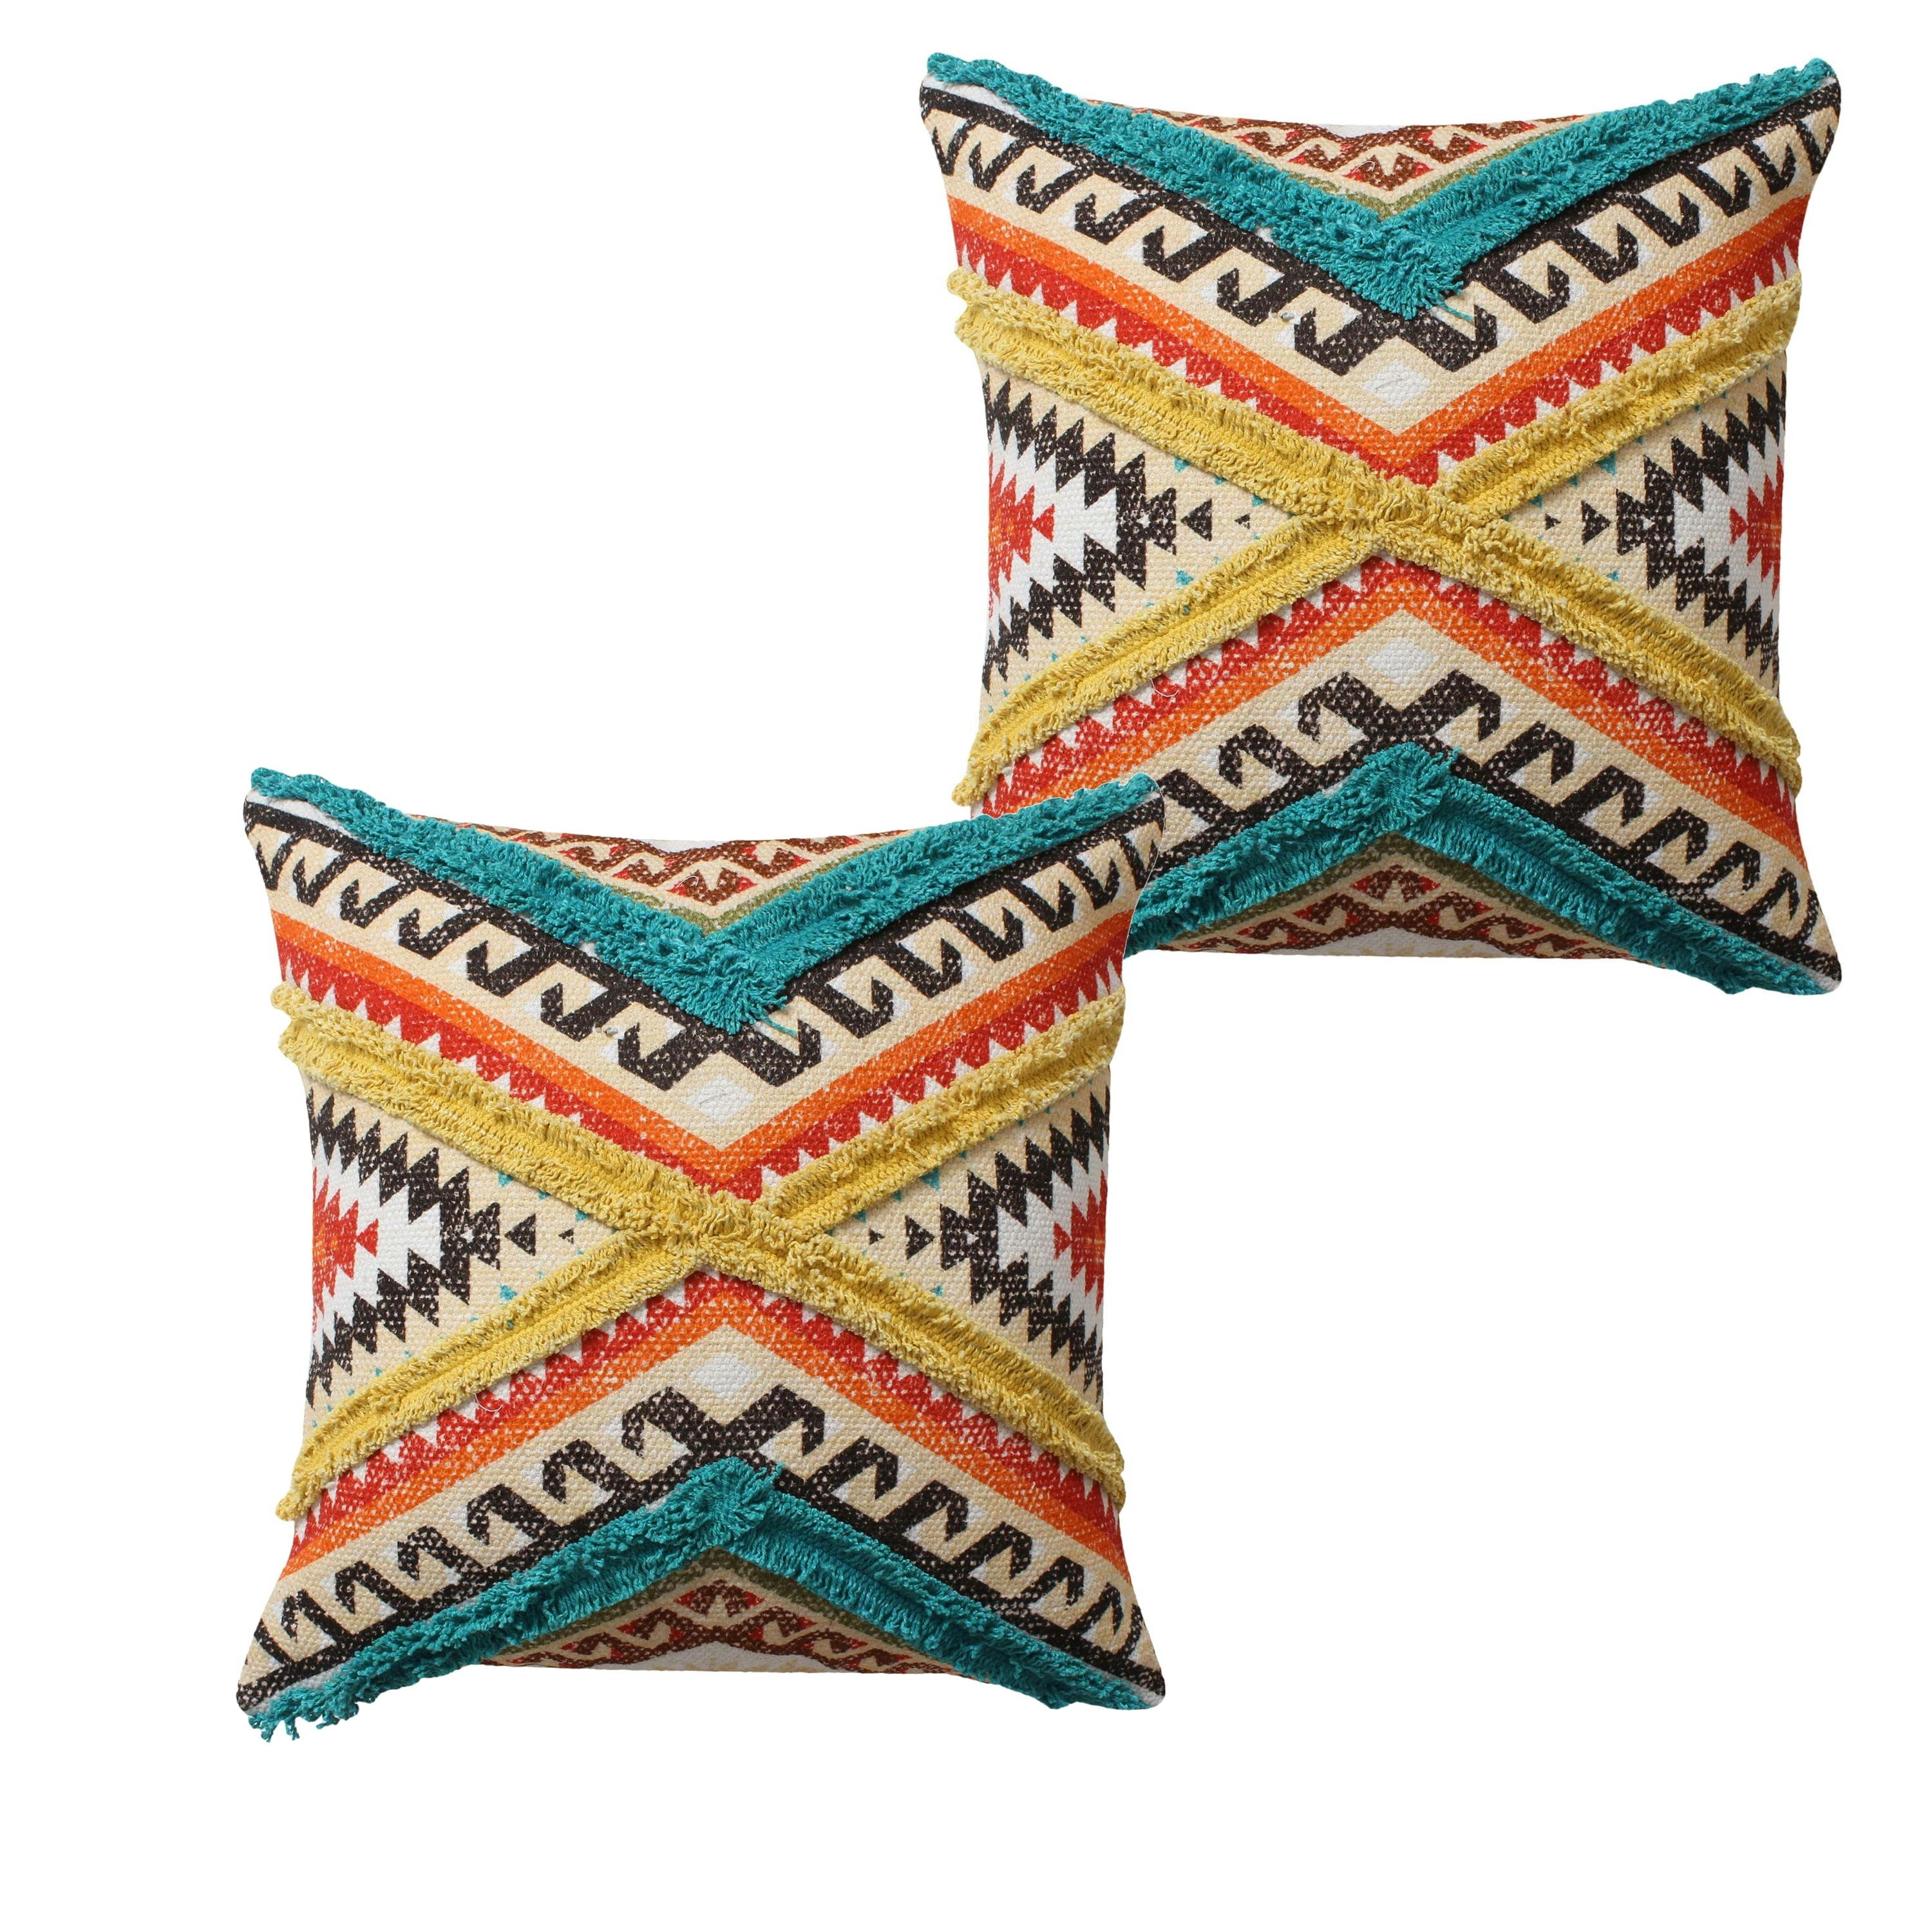 18" Square Cotton Accent Throw Pillow with Aztec Tribal Fringes, Multicolor